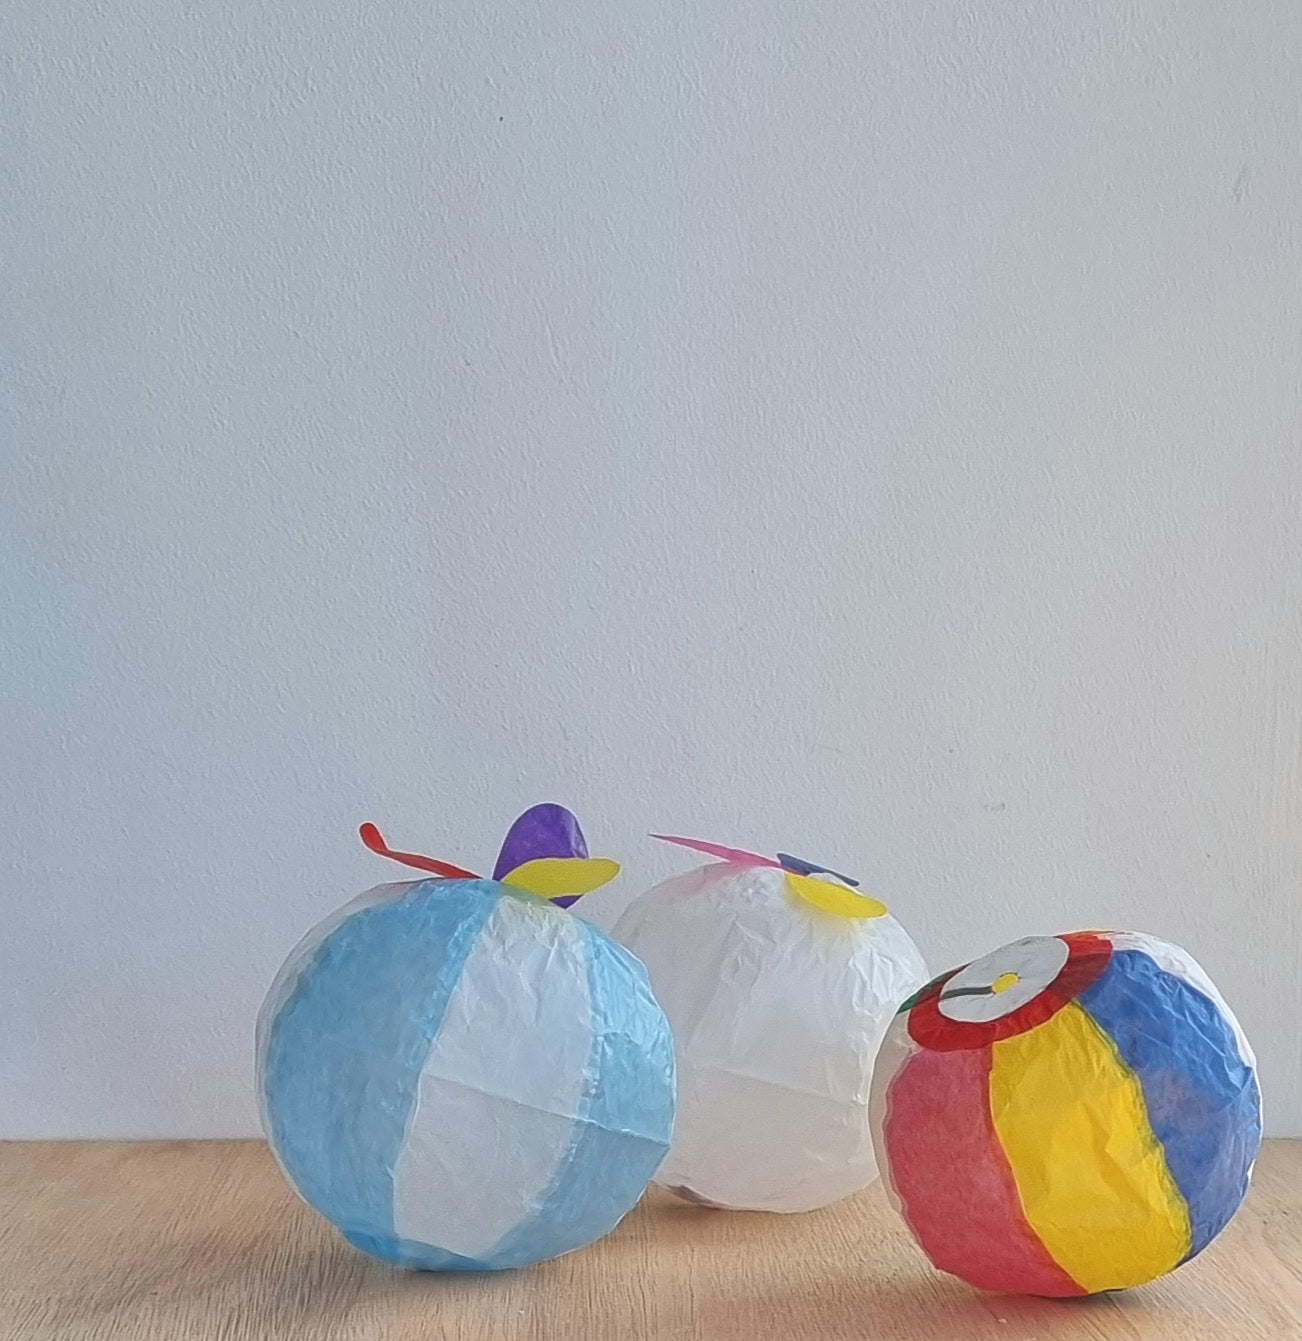 Set of 3 paper balloons